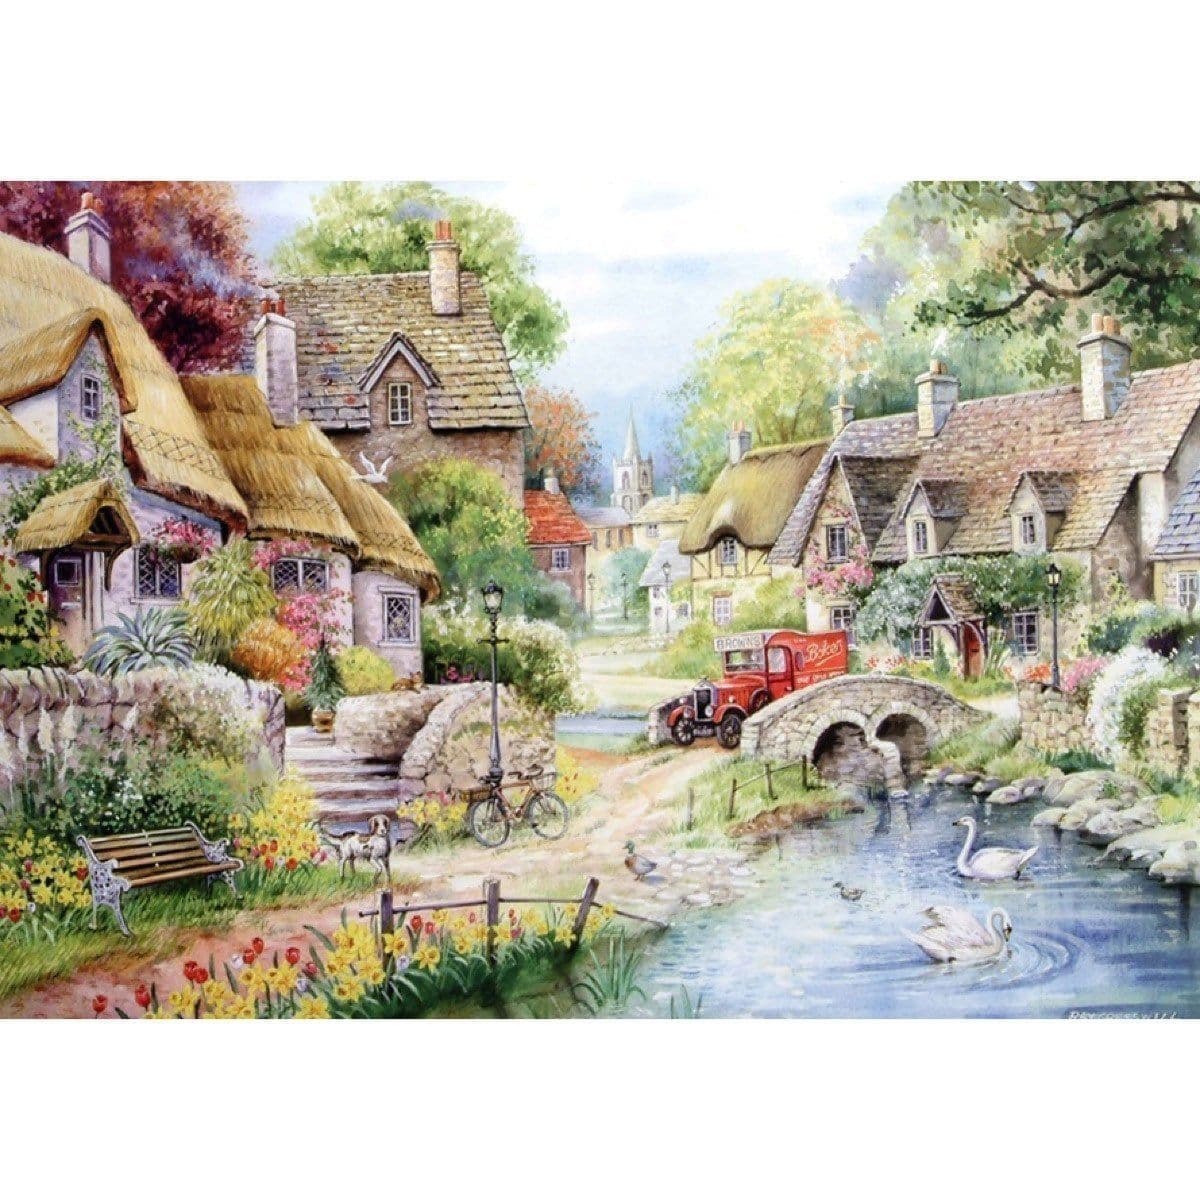 House of Puzzles - River Cottage - 250XL Piece Jigsaw Puzzle